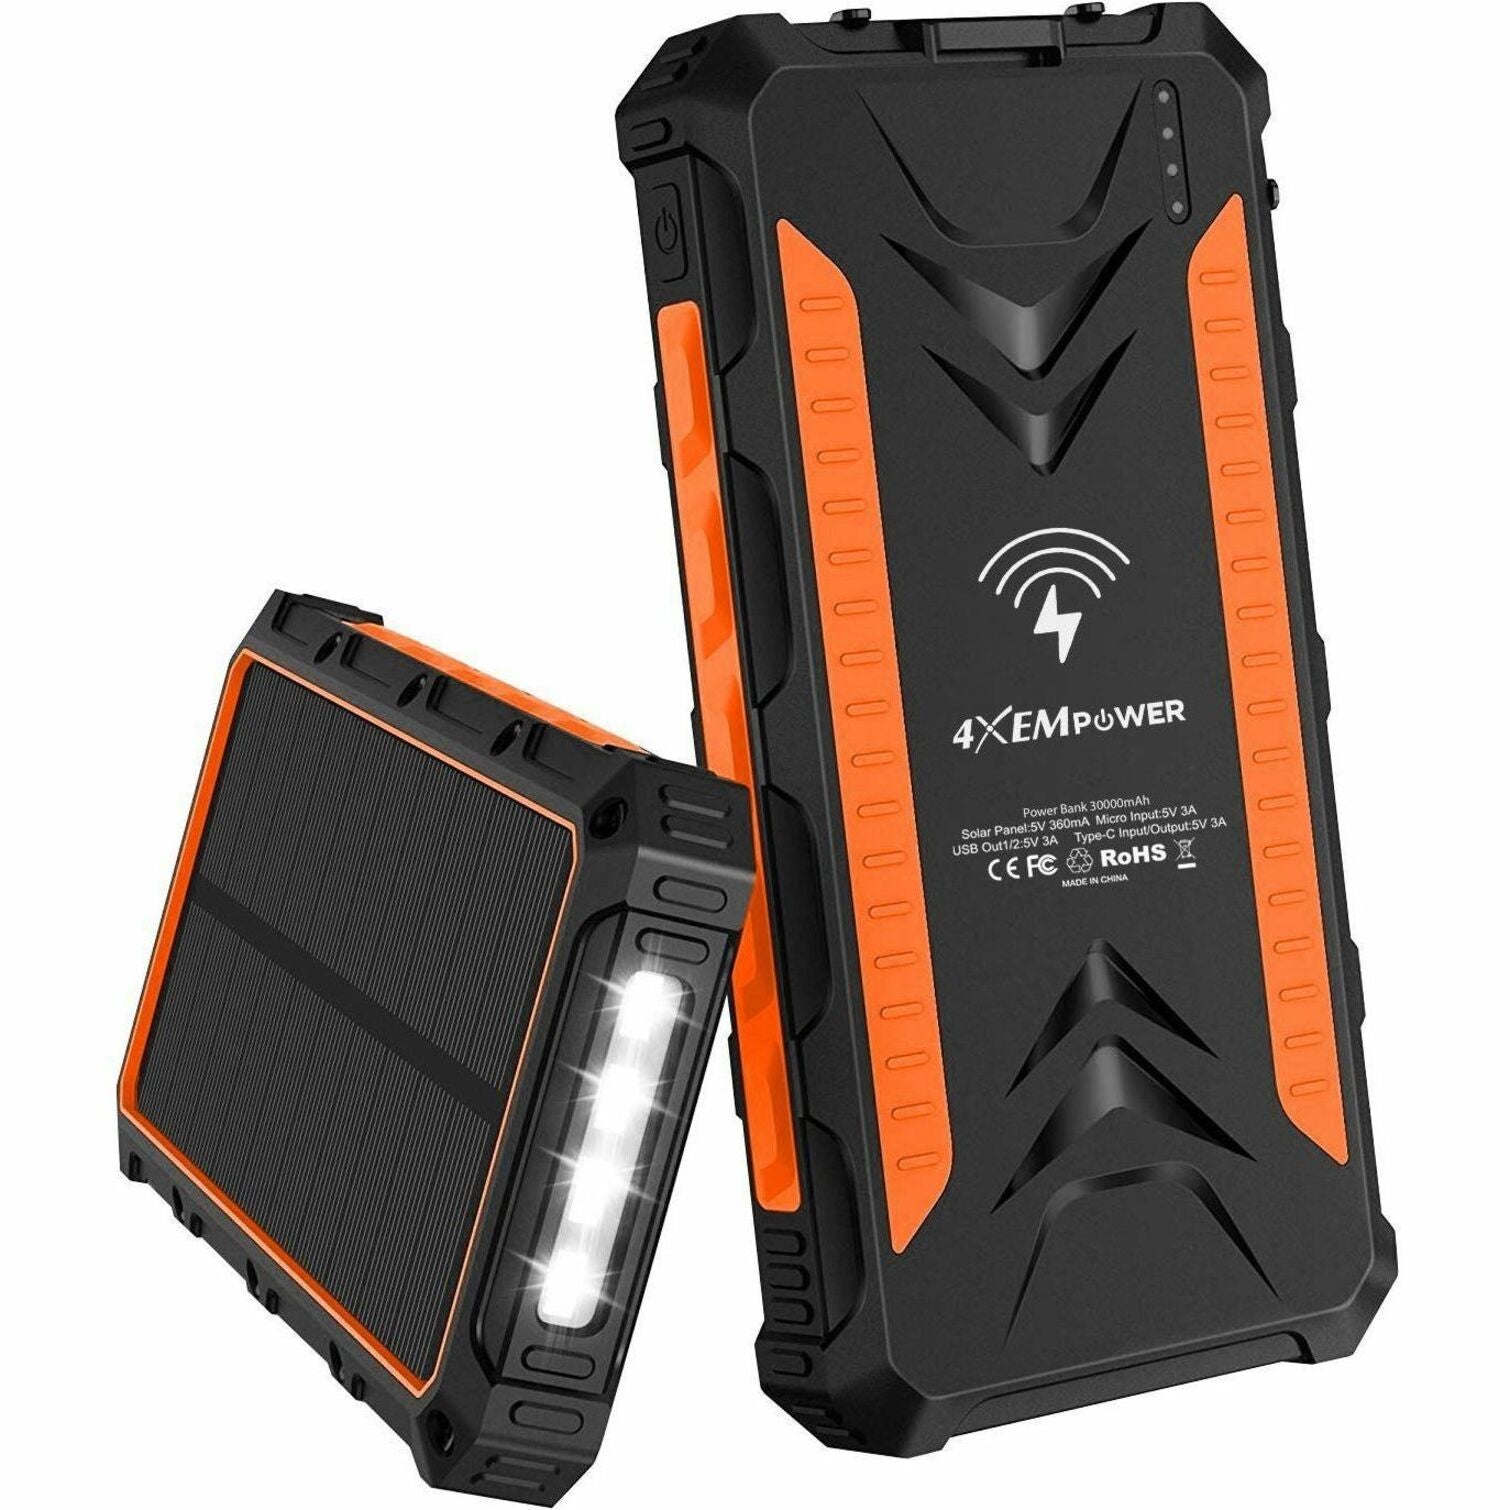 4XEM 4XSOLARPWR30OR 30,000 mAh Mobile Solar Power Bank and Charger (Orange), Outdoor Camping Essential